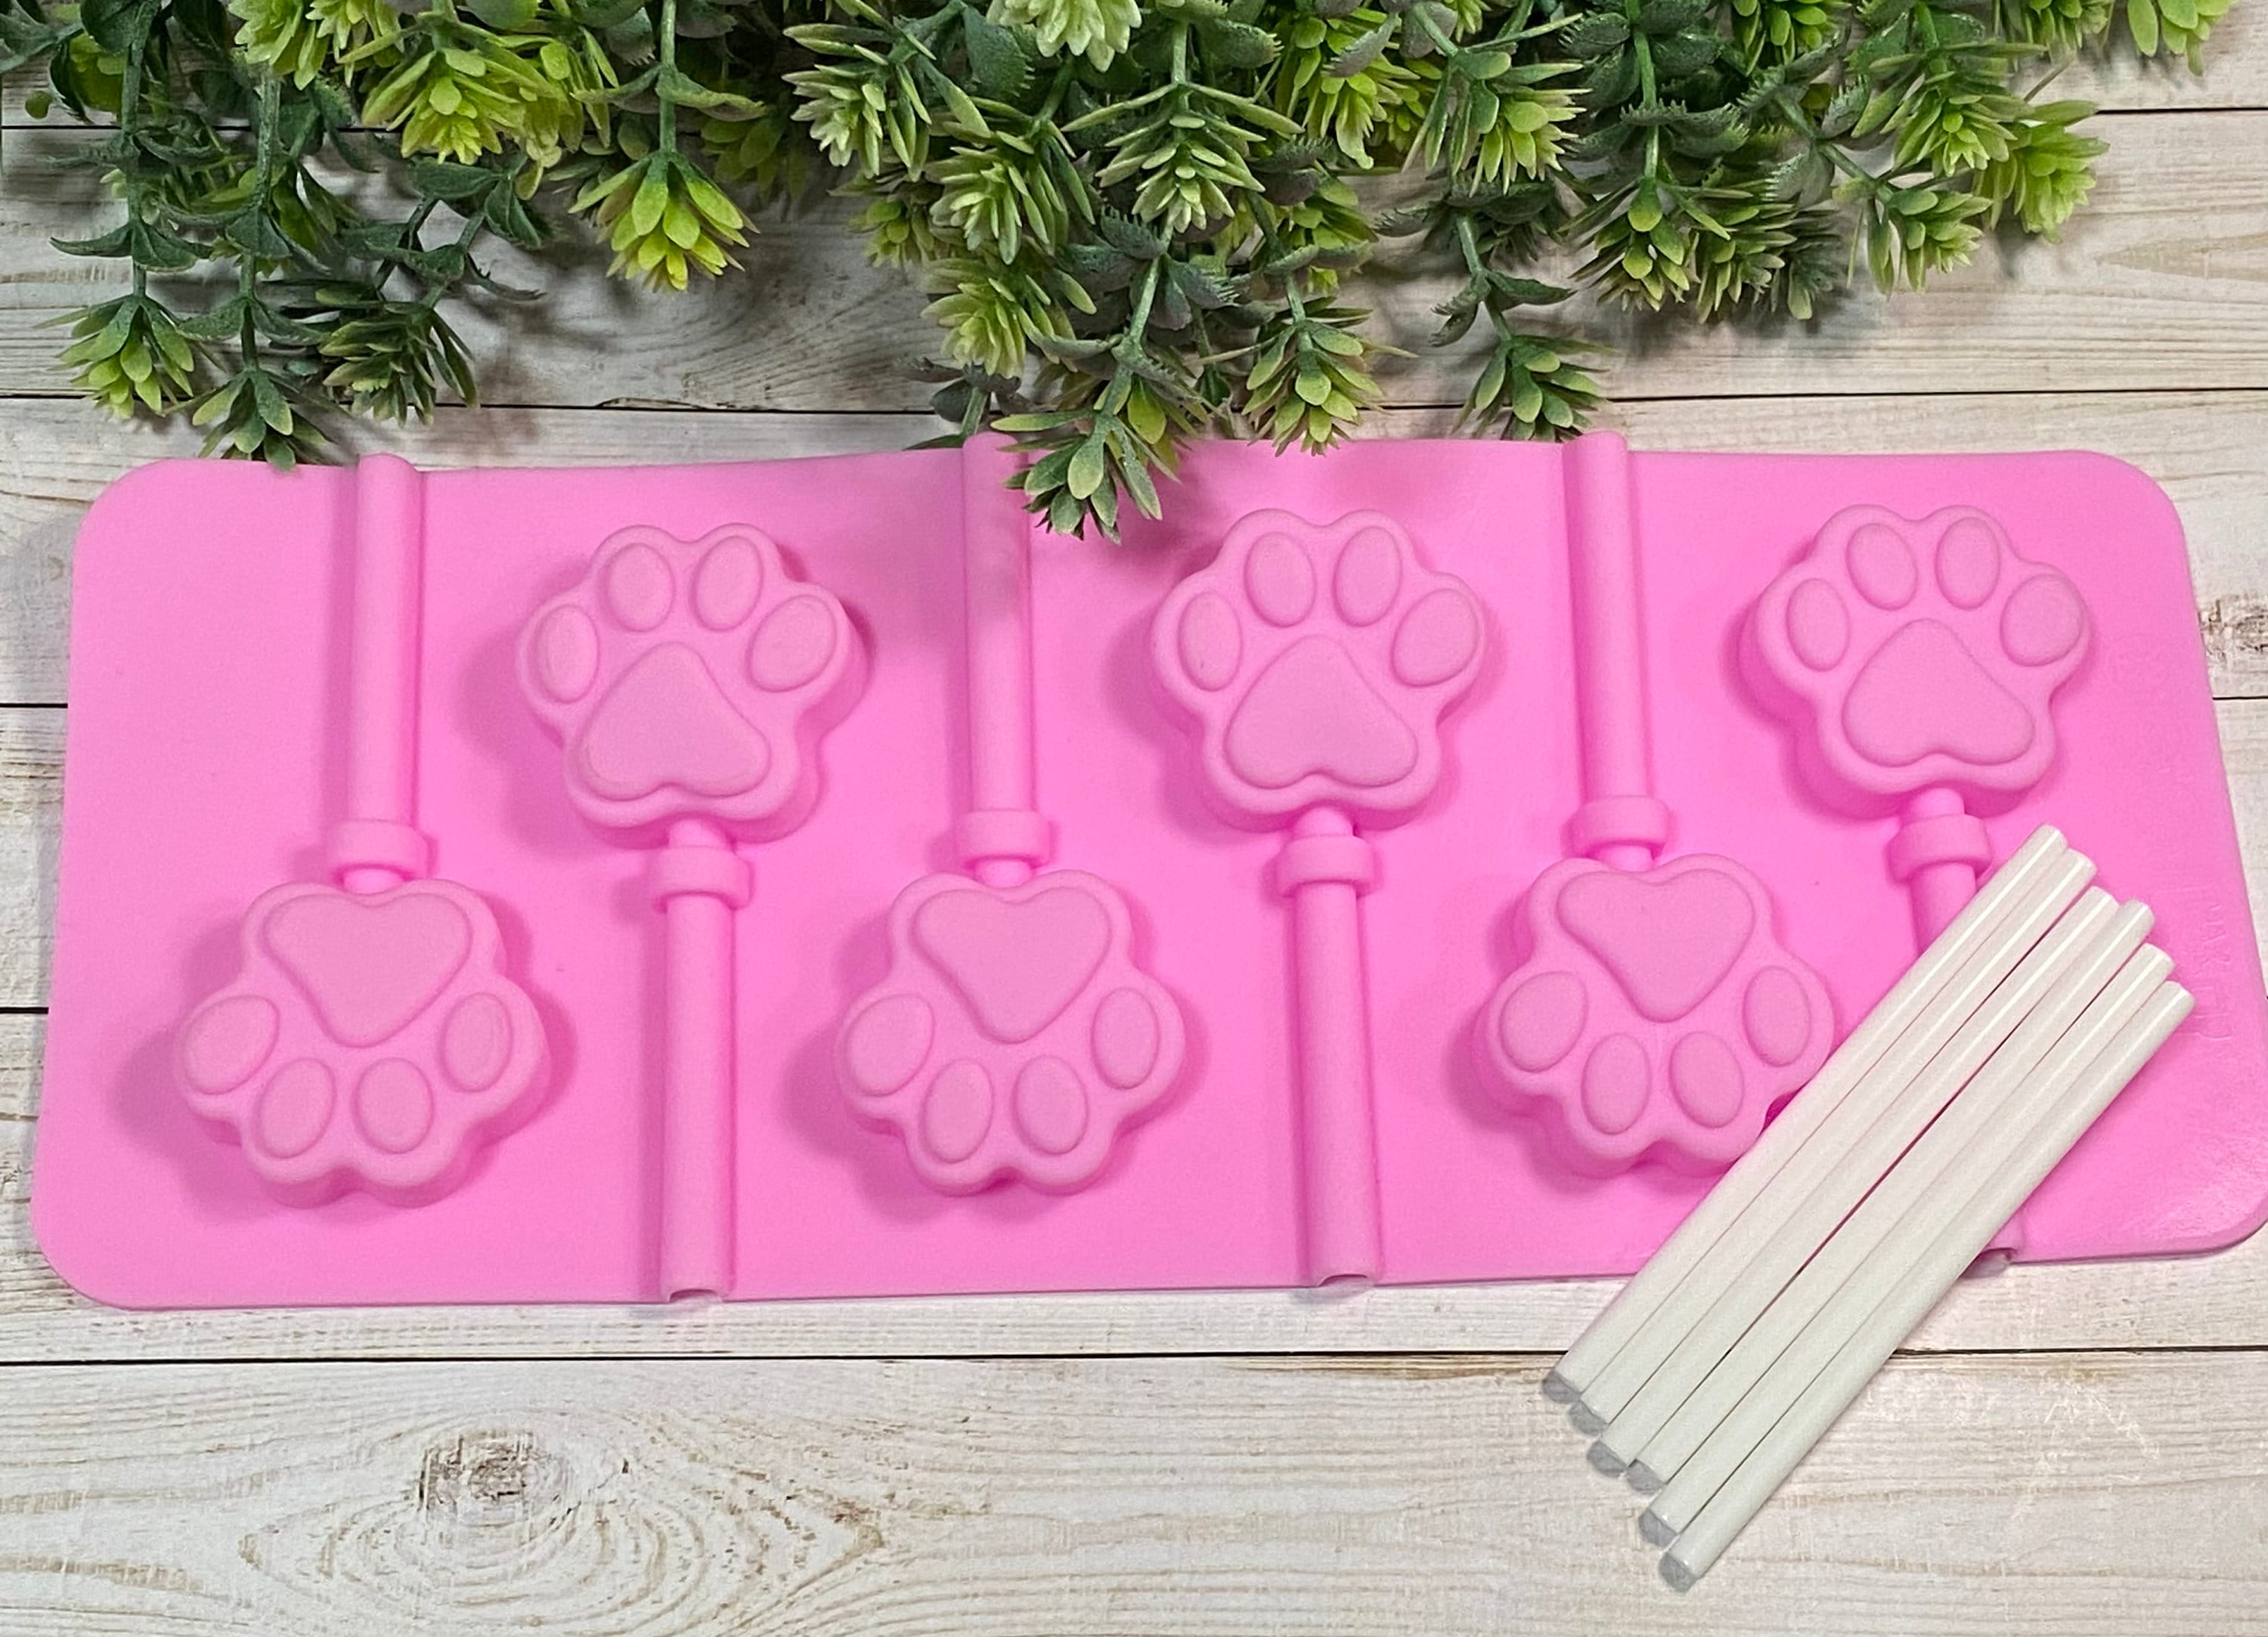 Mini Dinosaurs Silicone Mold-assorted Dino Mold-candy Mold, Chocolate Mold-ice  Tray Mold-resin Mold-fondant Cake Mold-crayons Mold 